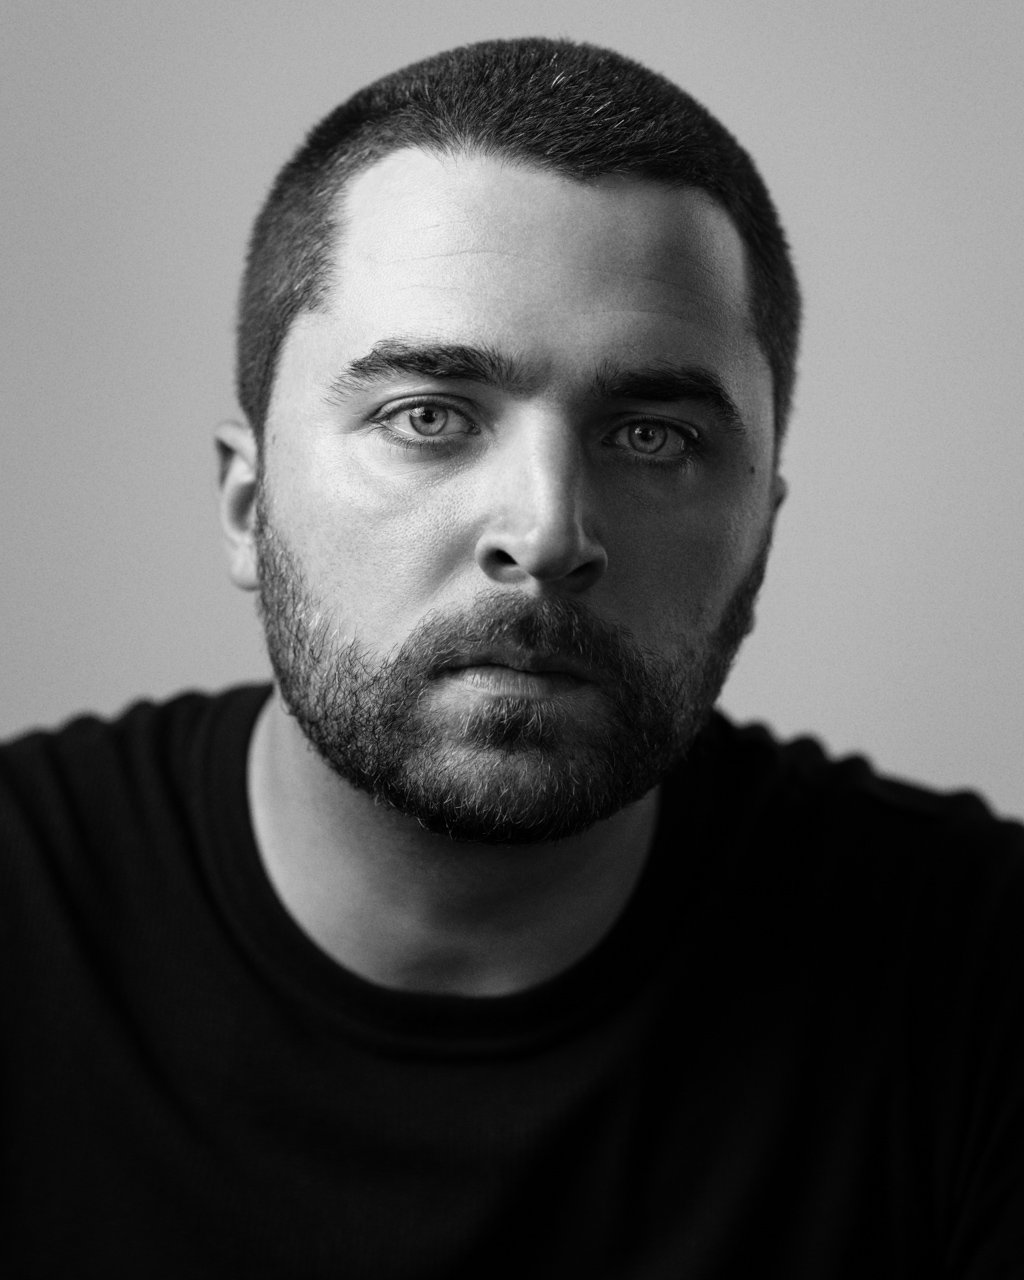 A headshot of an actor with a buzz cut and beard.